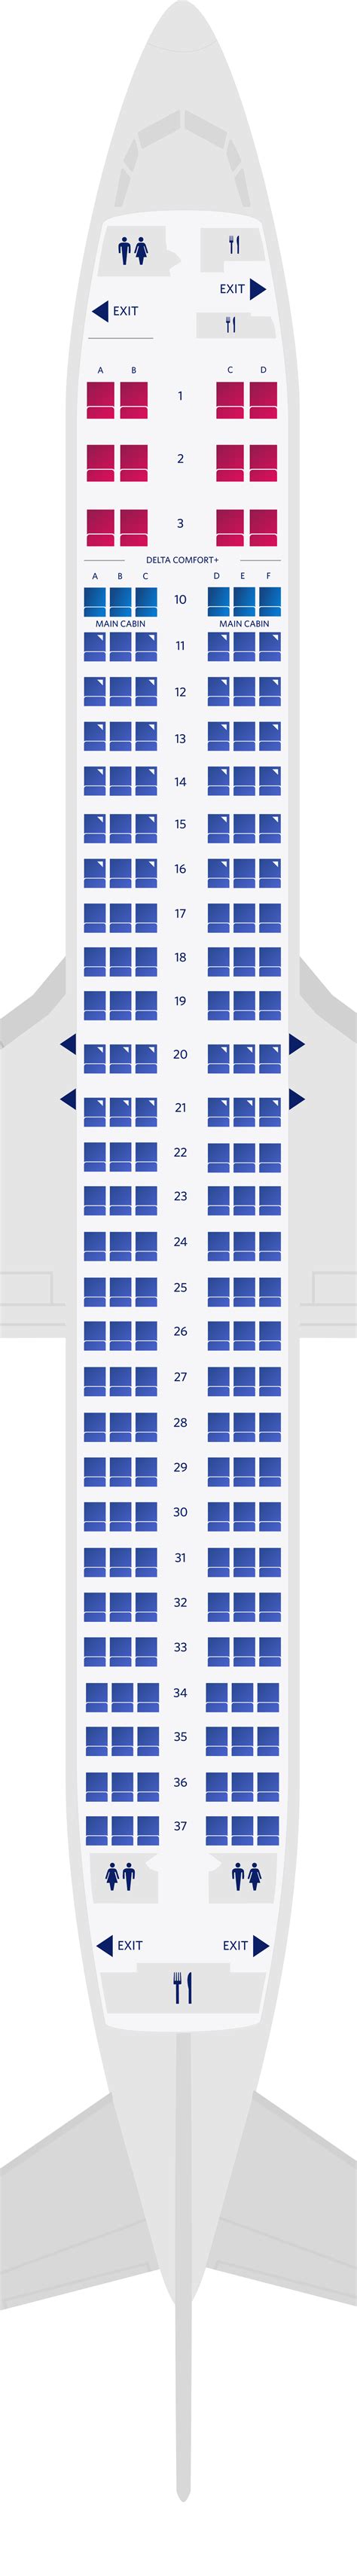 Seat 20 E is a standard Economy Plus Class seat located in an Exit Row